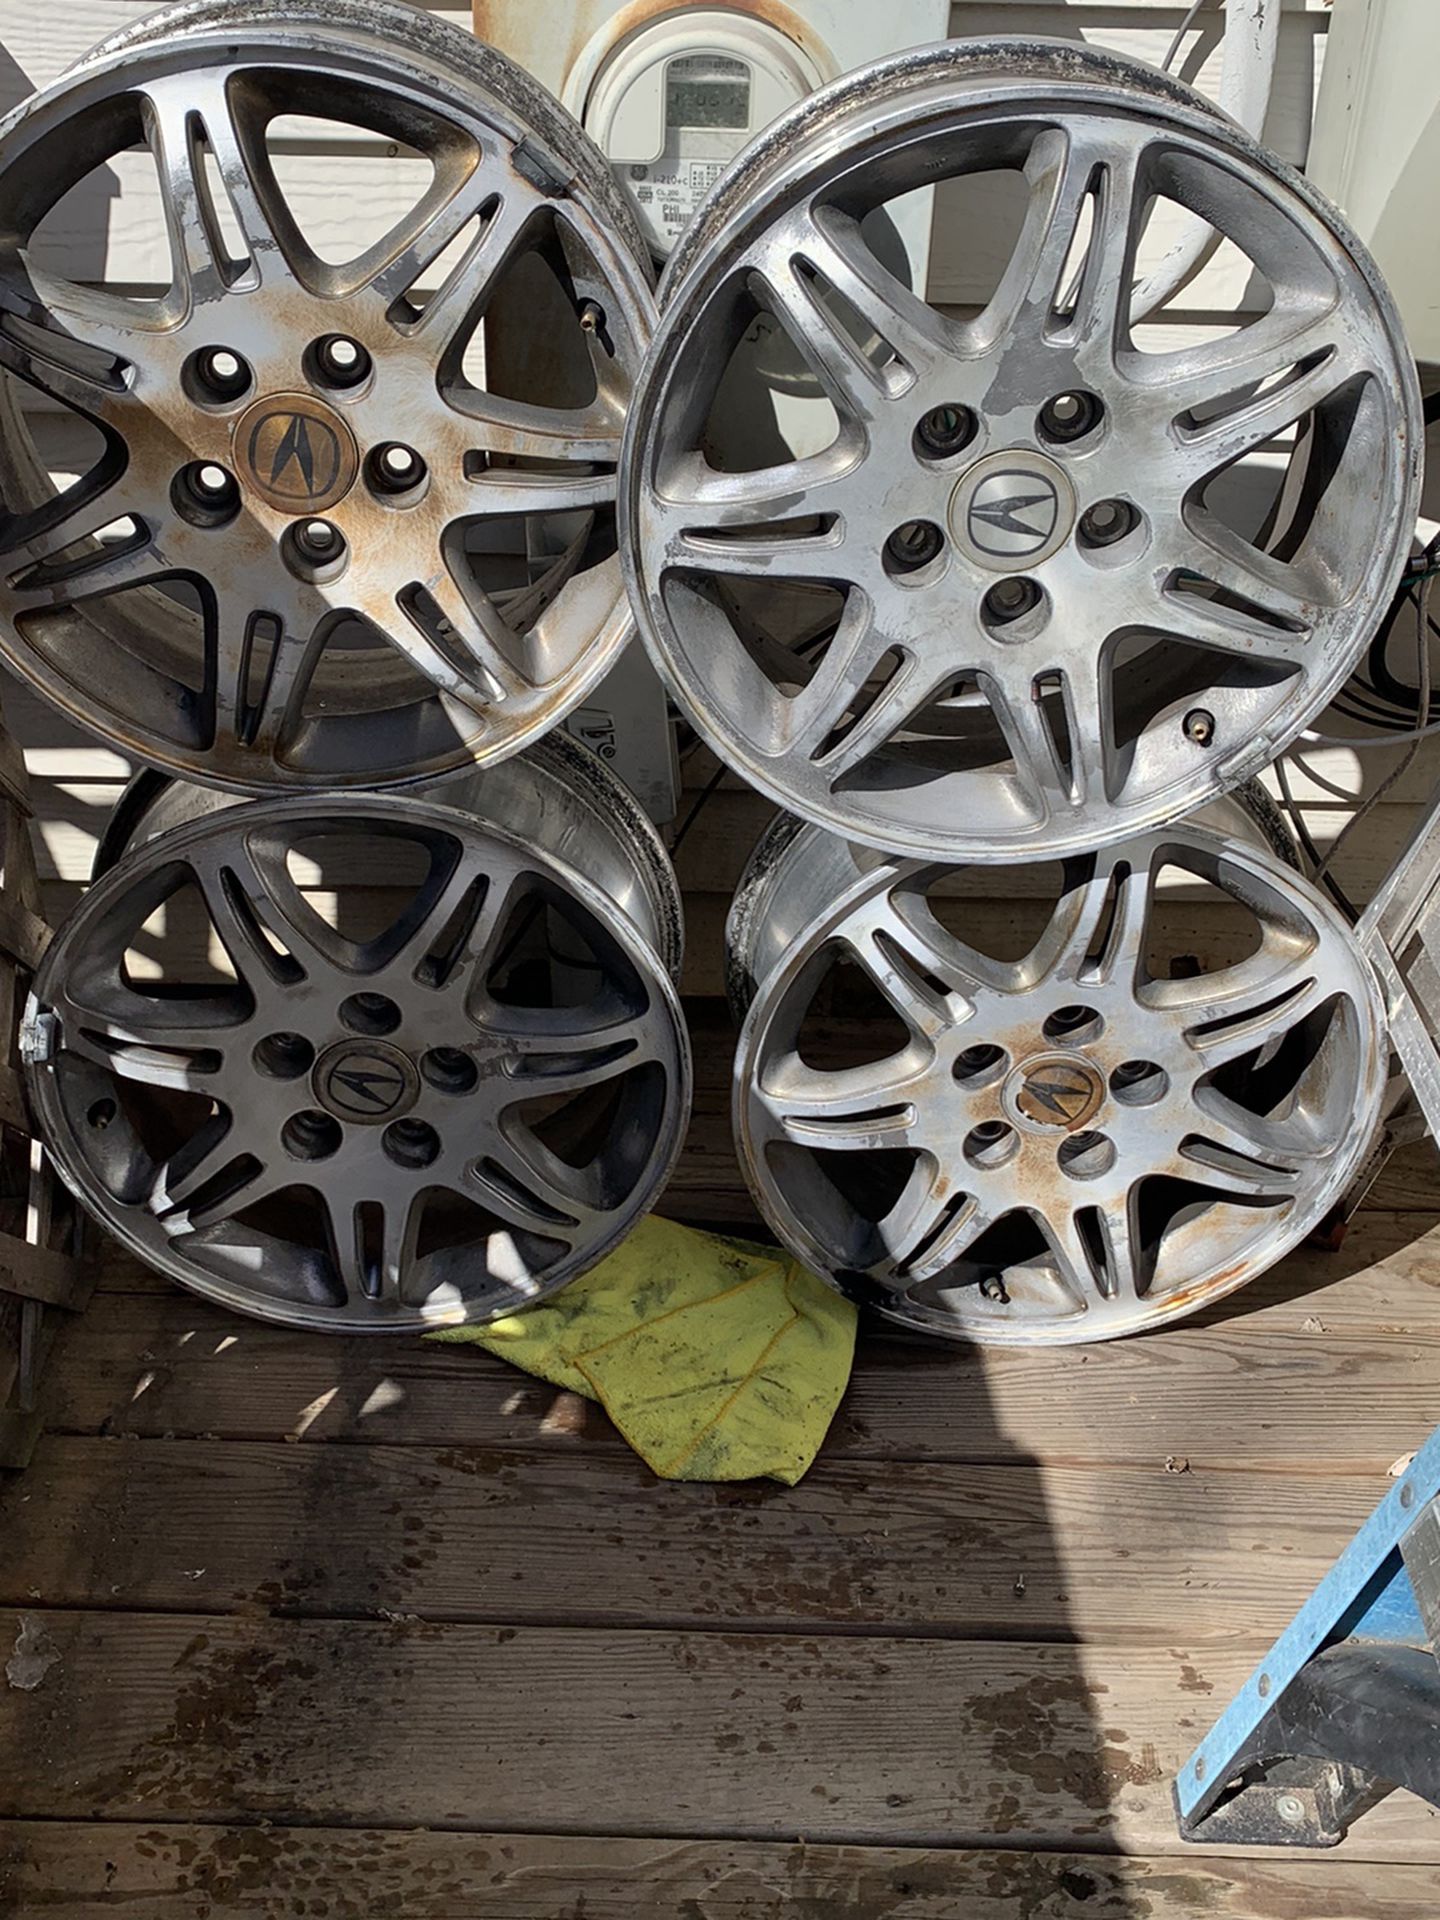 Acura TL 99 Rims 16” Sanded Down, Ready For Paint